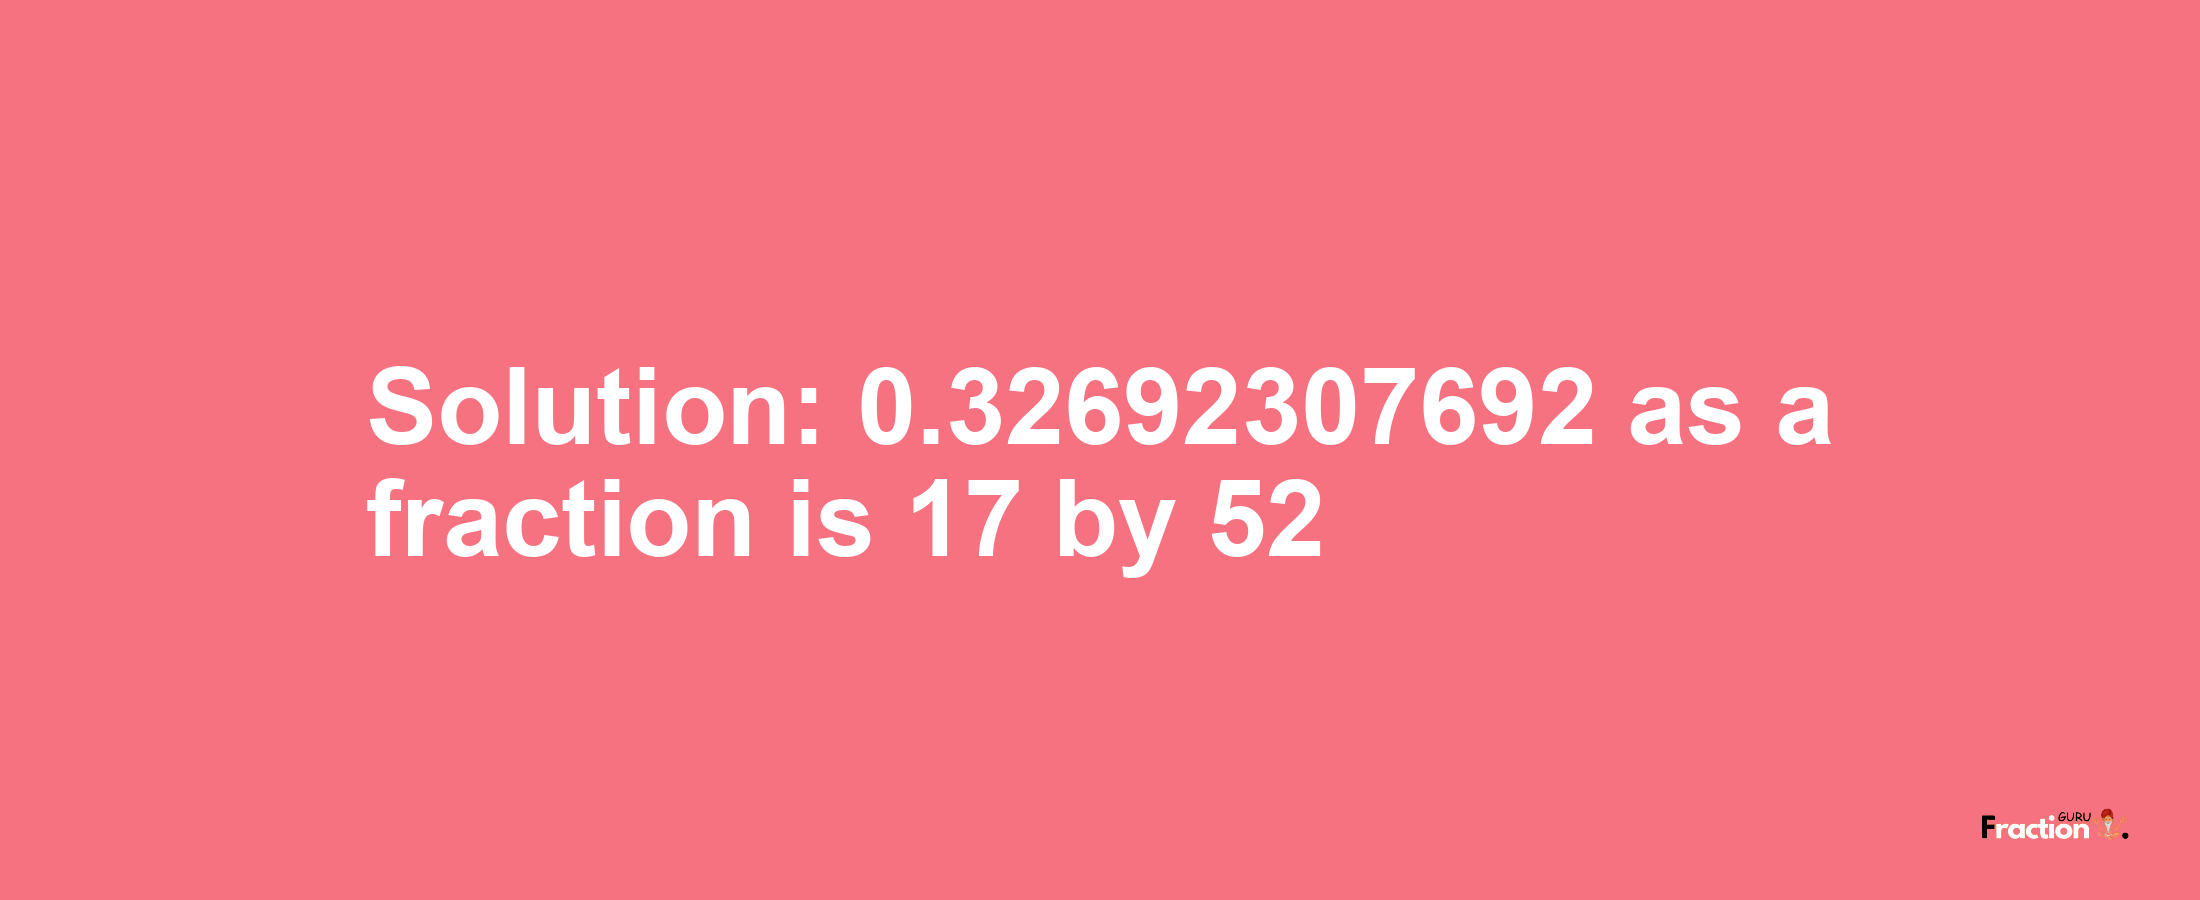 Solution:0.32692307692 as a fraction is 17/52